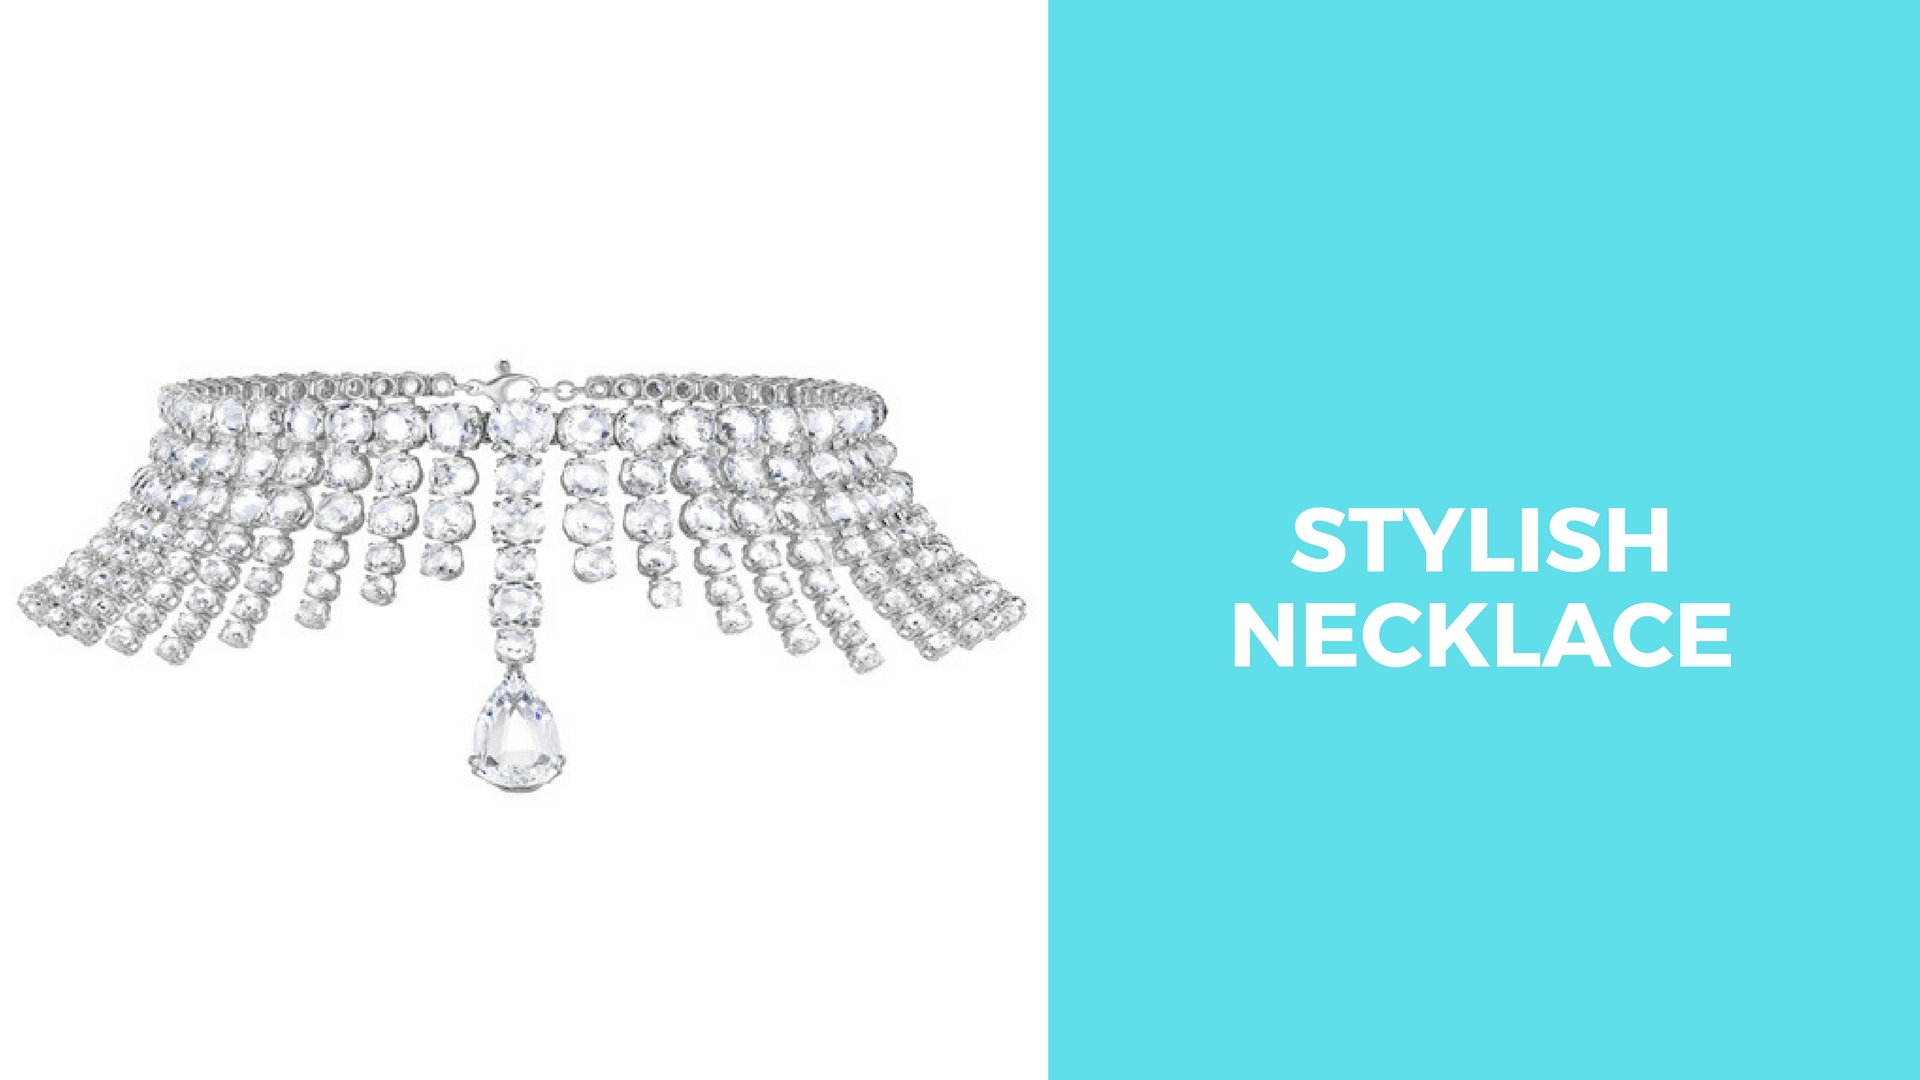 Stylish Necklace - Must Have Jewelry for women